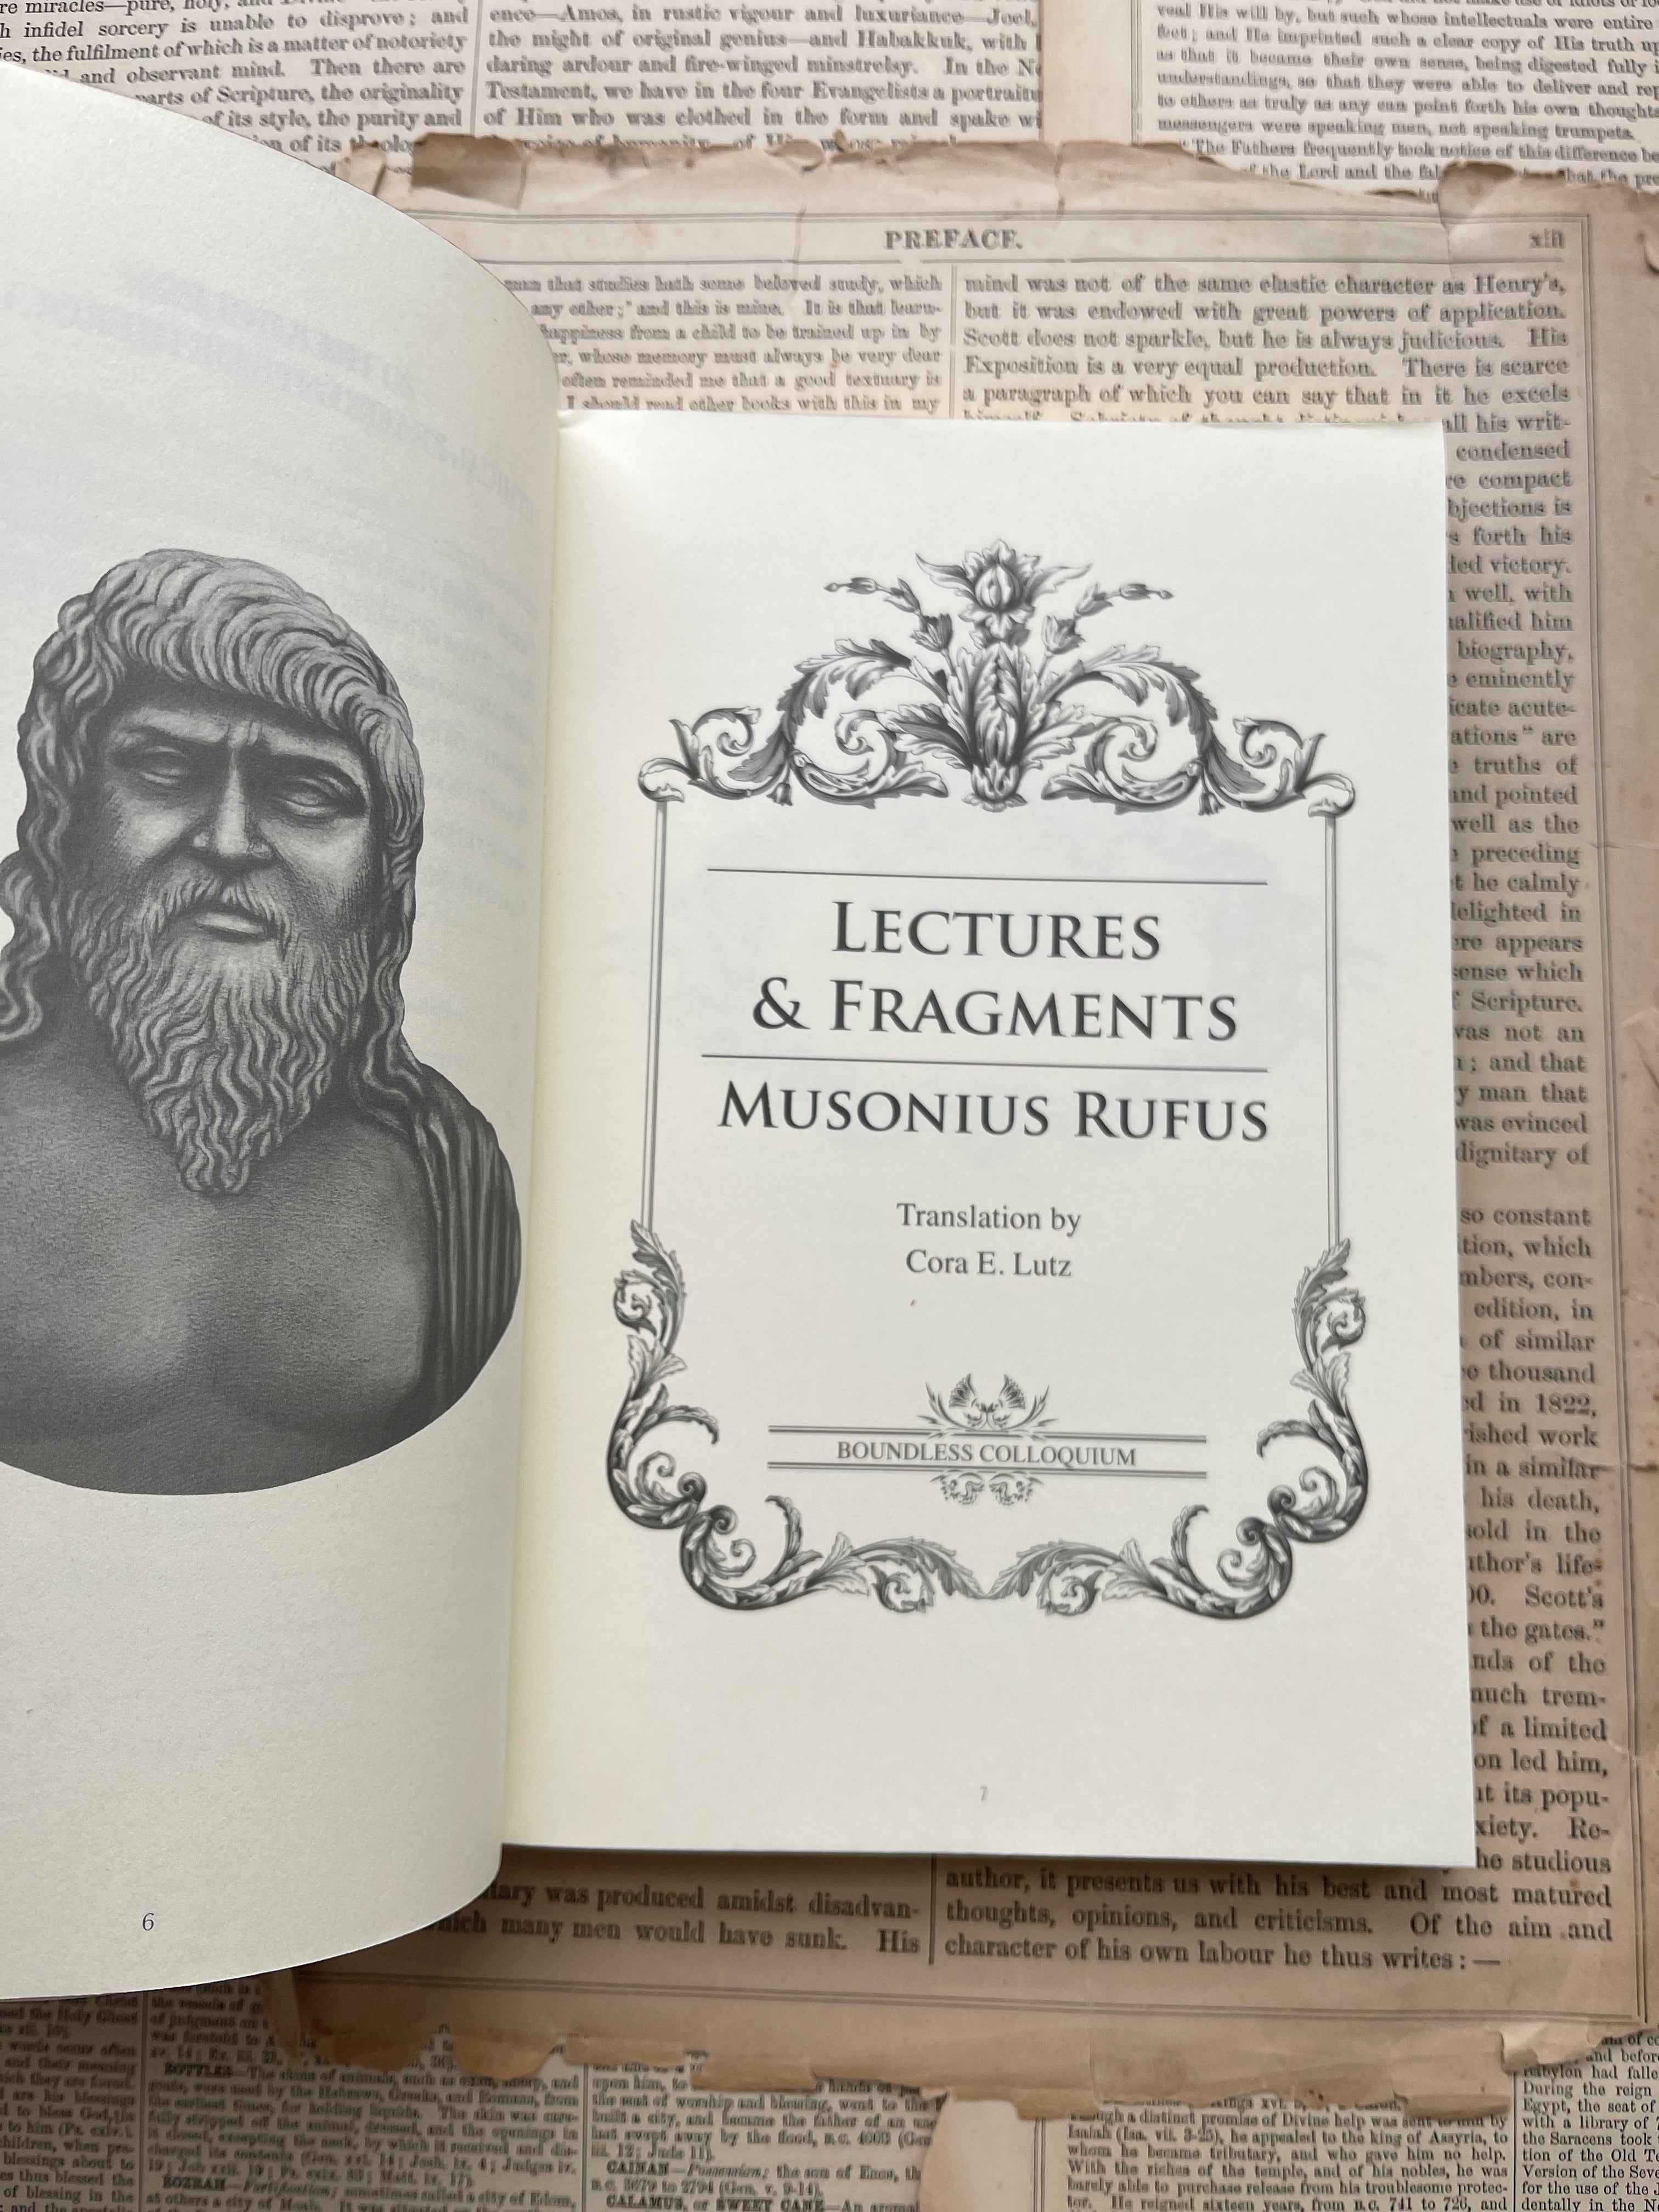 Musonius Rufus Letters & Fragments: Stoic Wisdom in Hardcover Edition